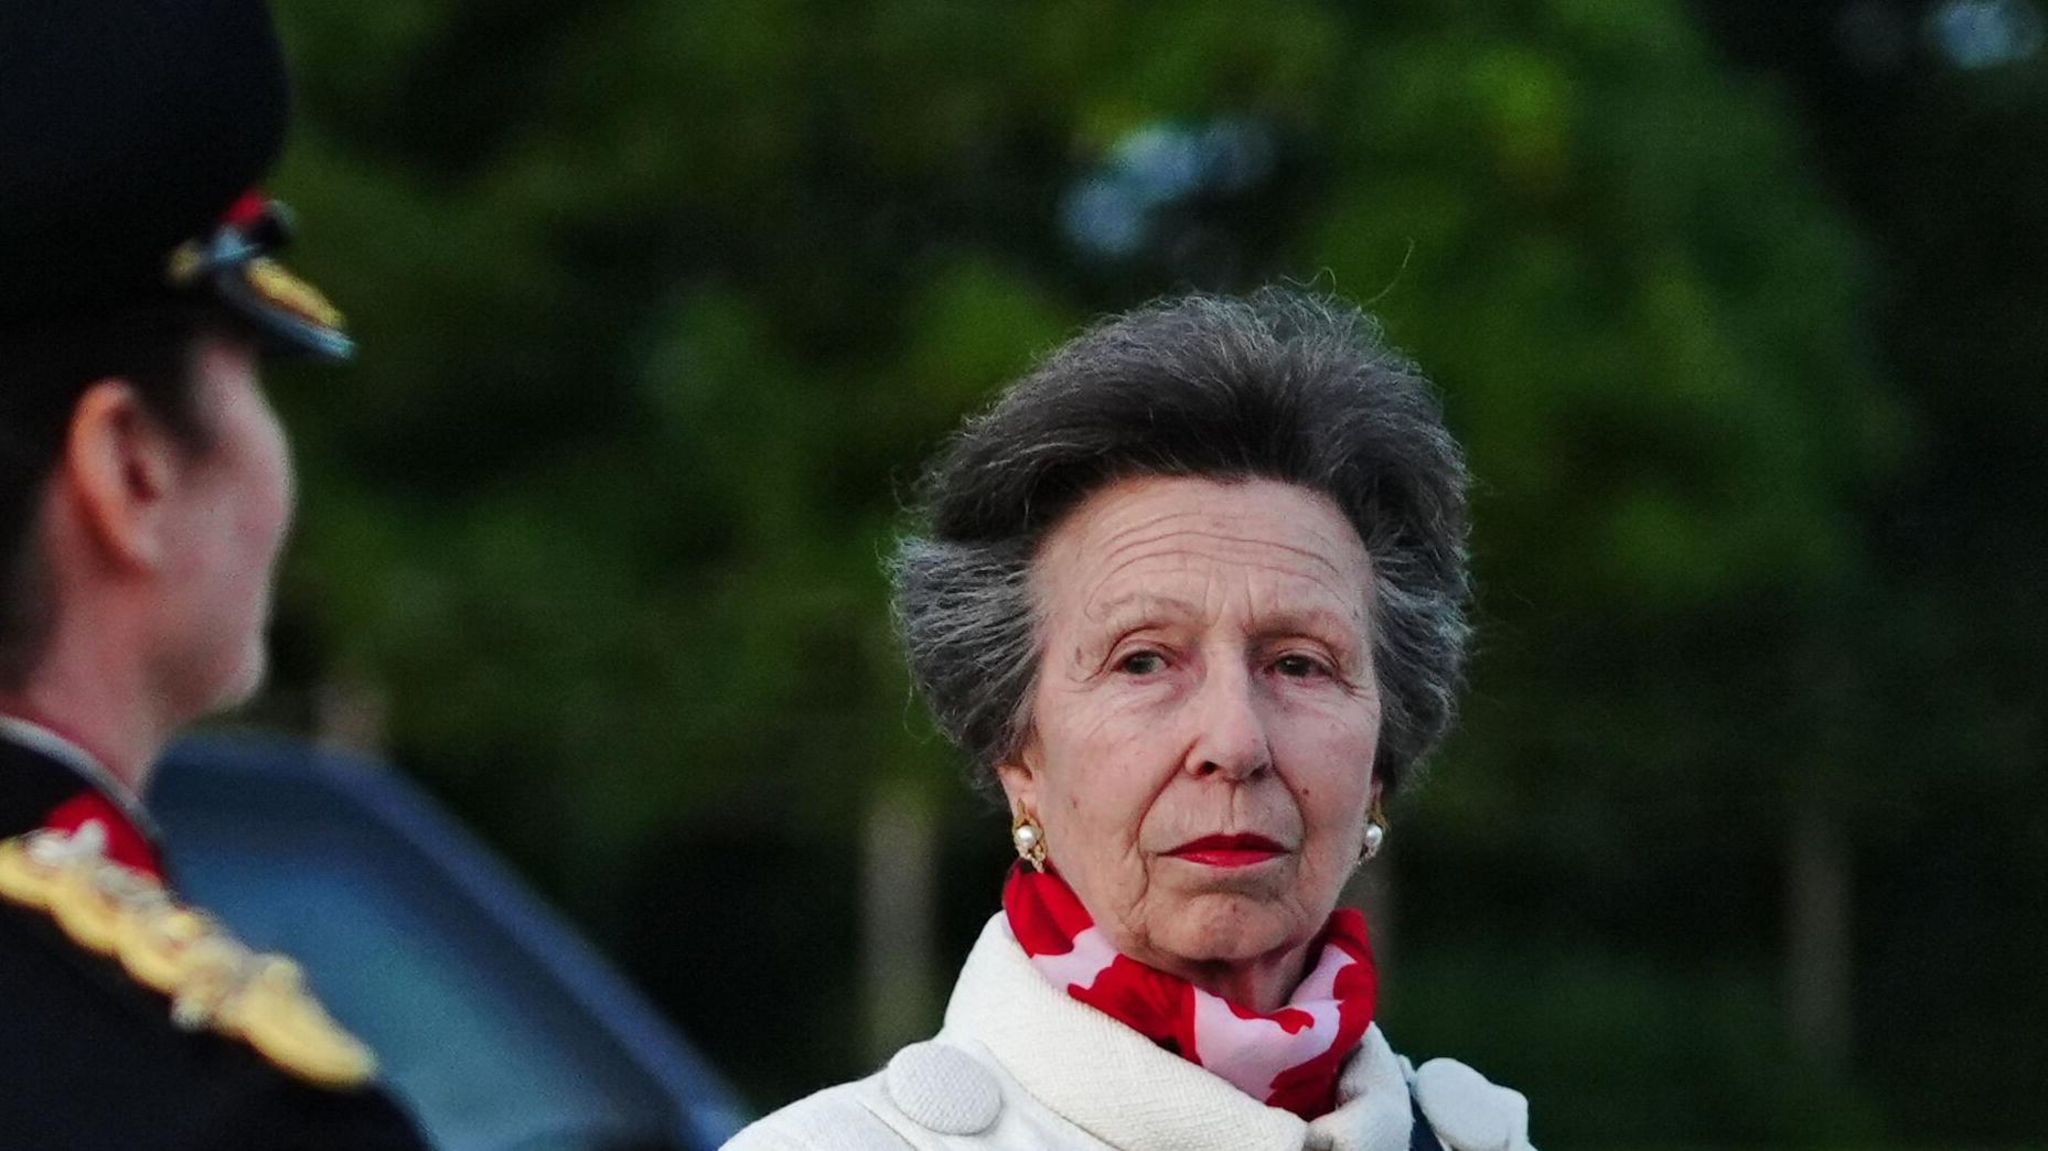 Princess Anne with red lipstick wearing white coat and pearl earrings.